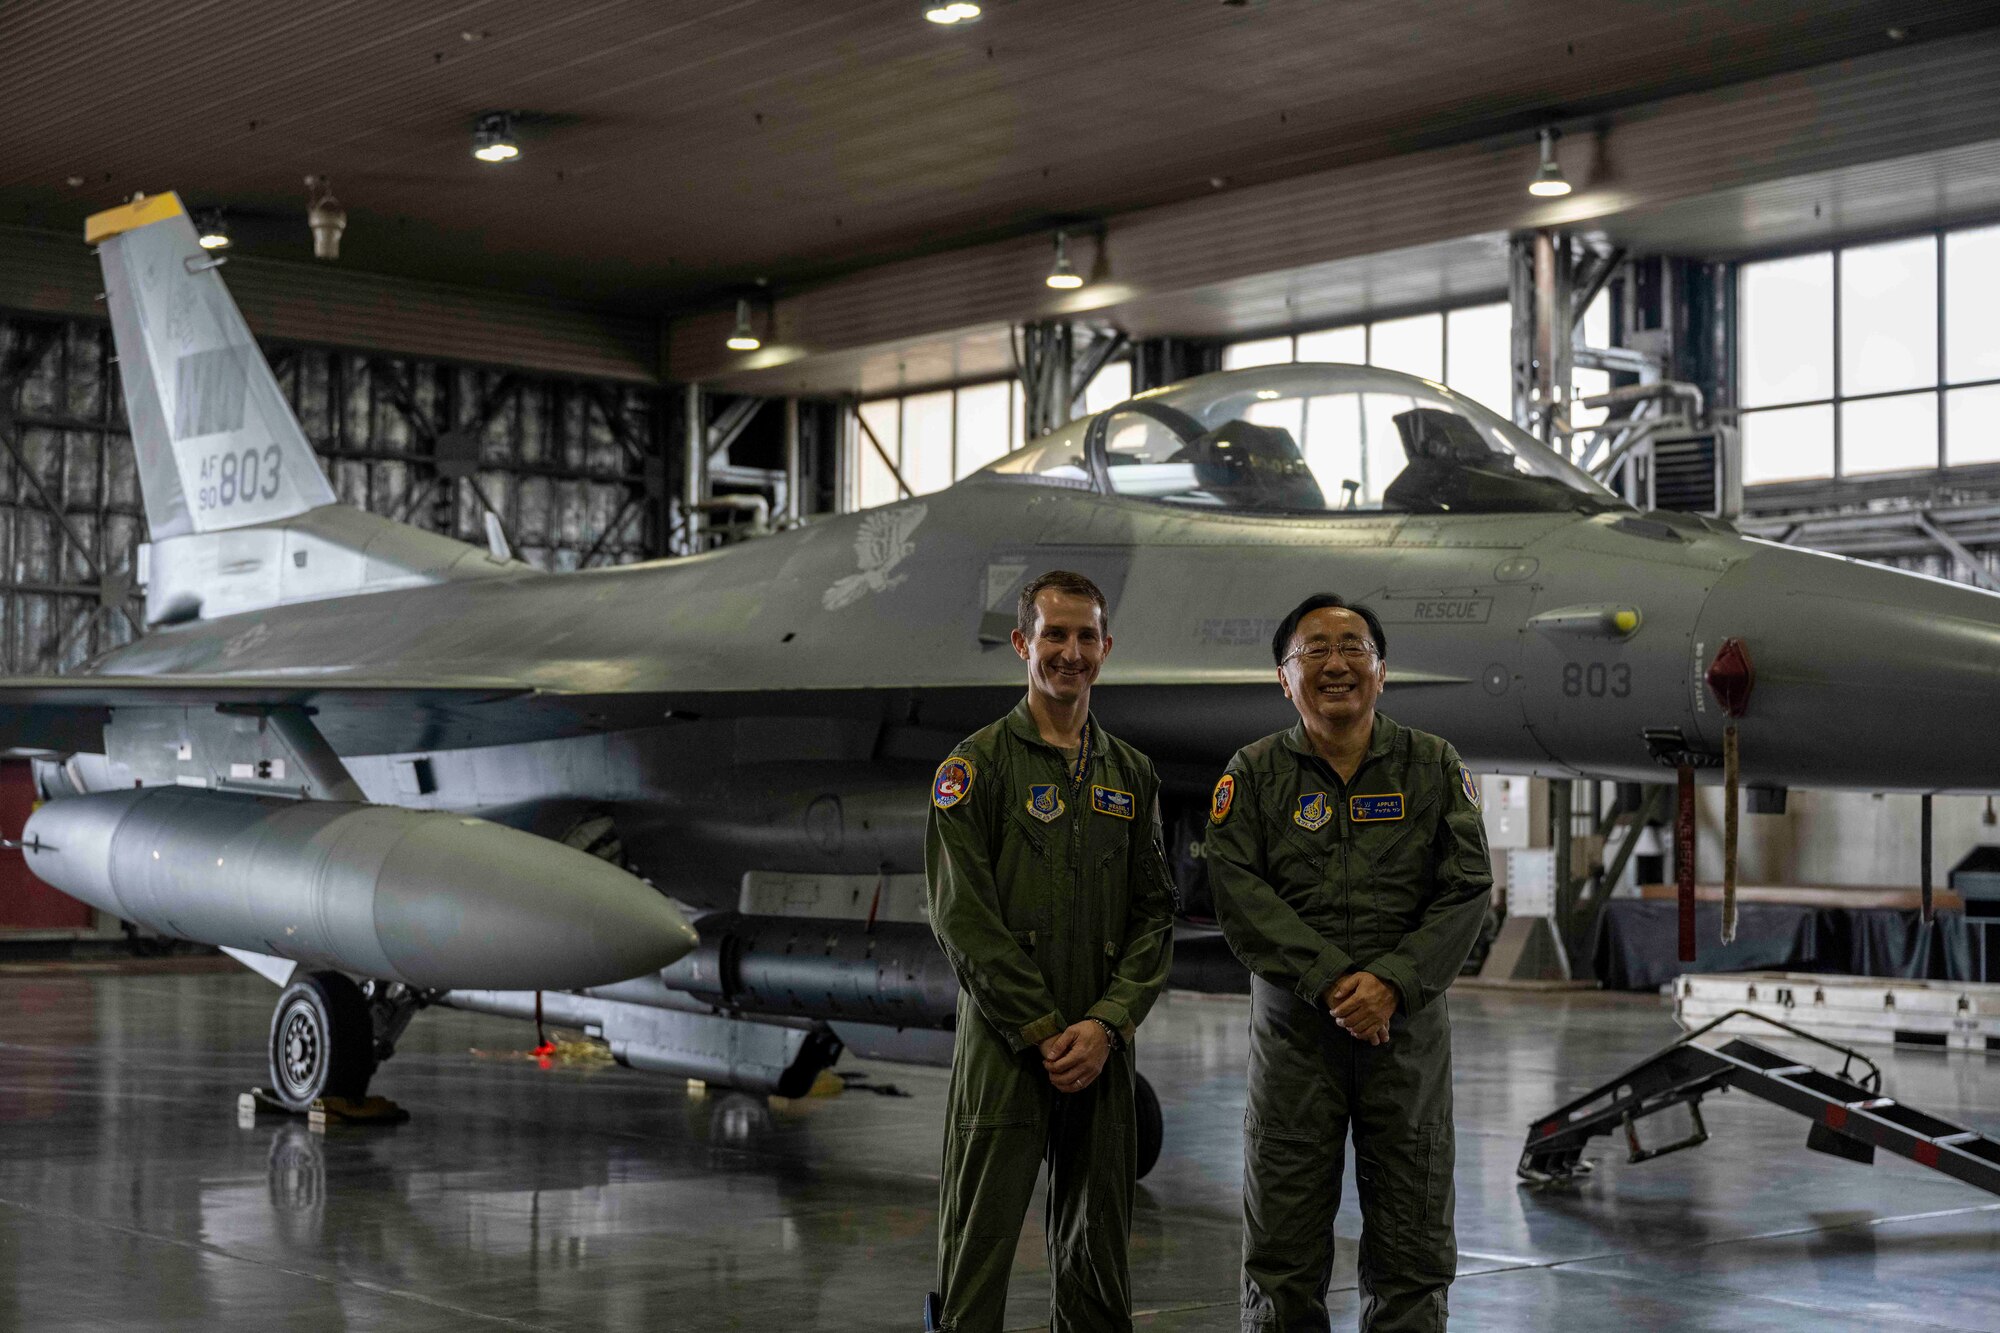 Two people pose in front of a fighter jet inside a hangar at Misawa Air Base.